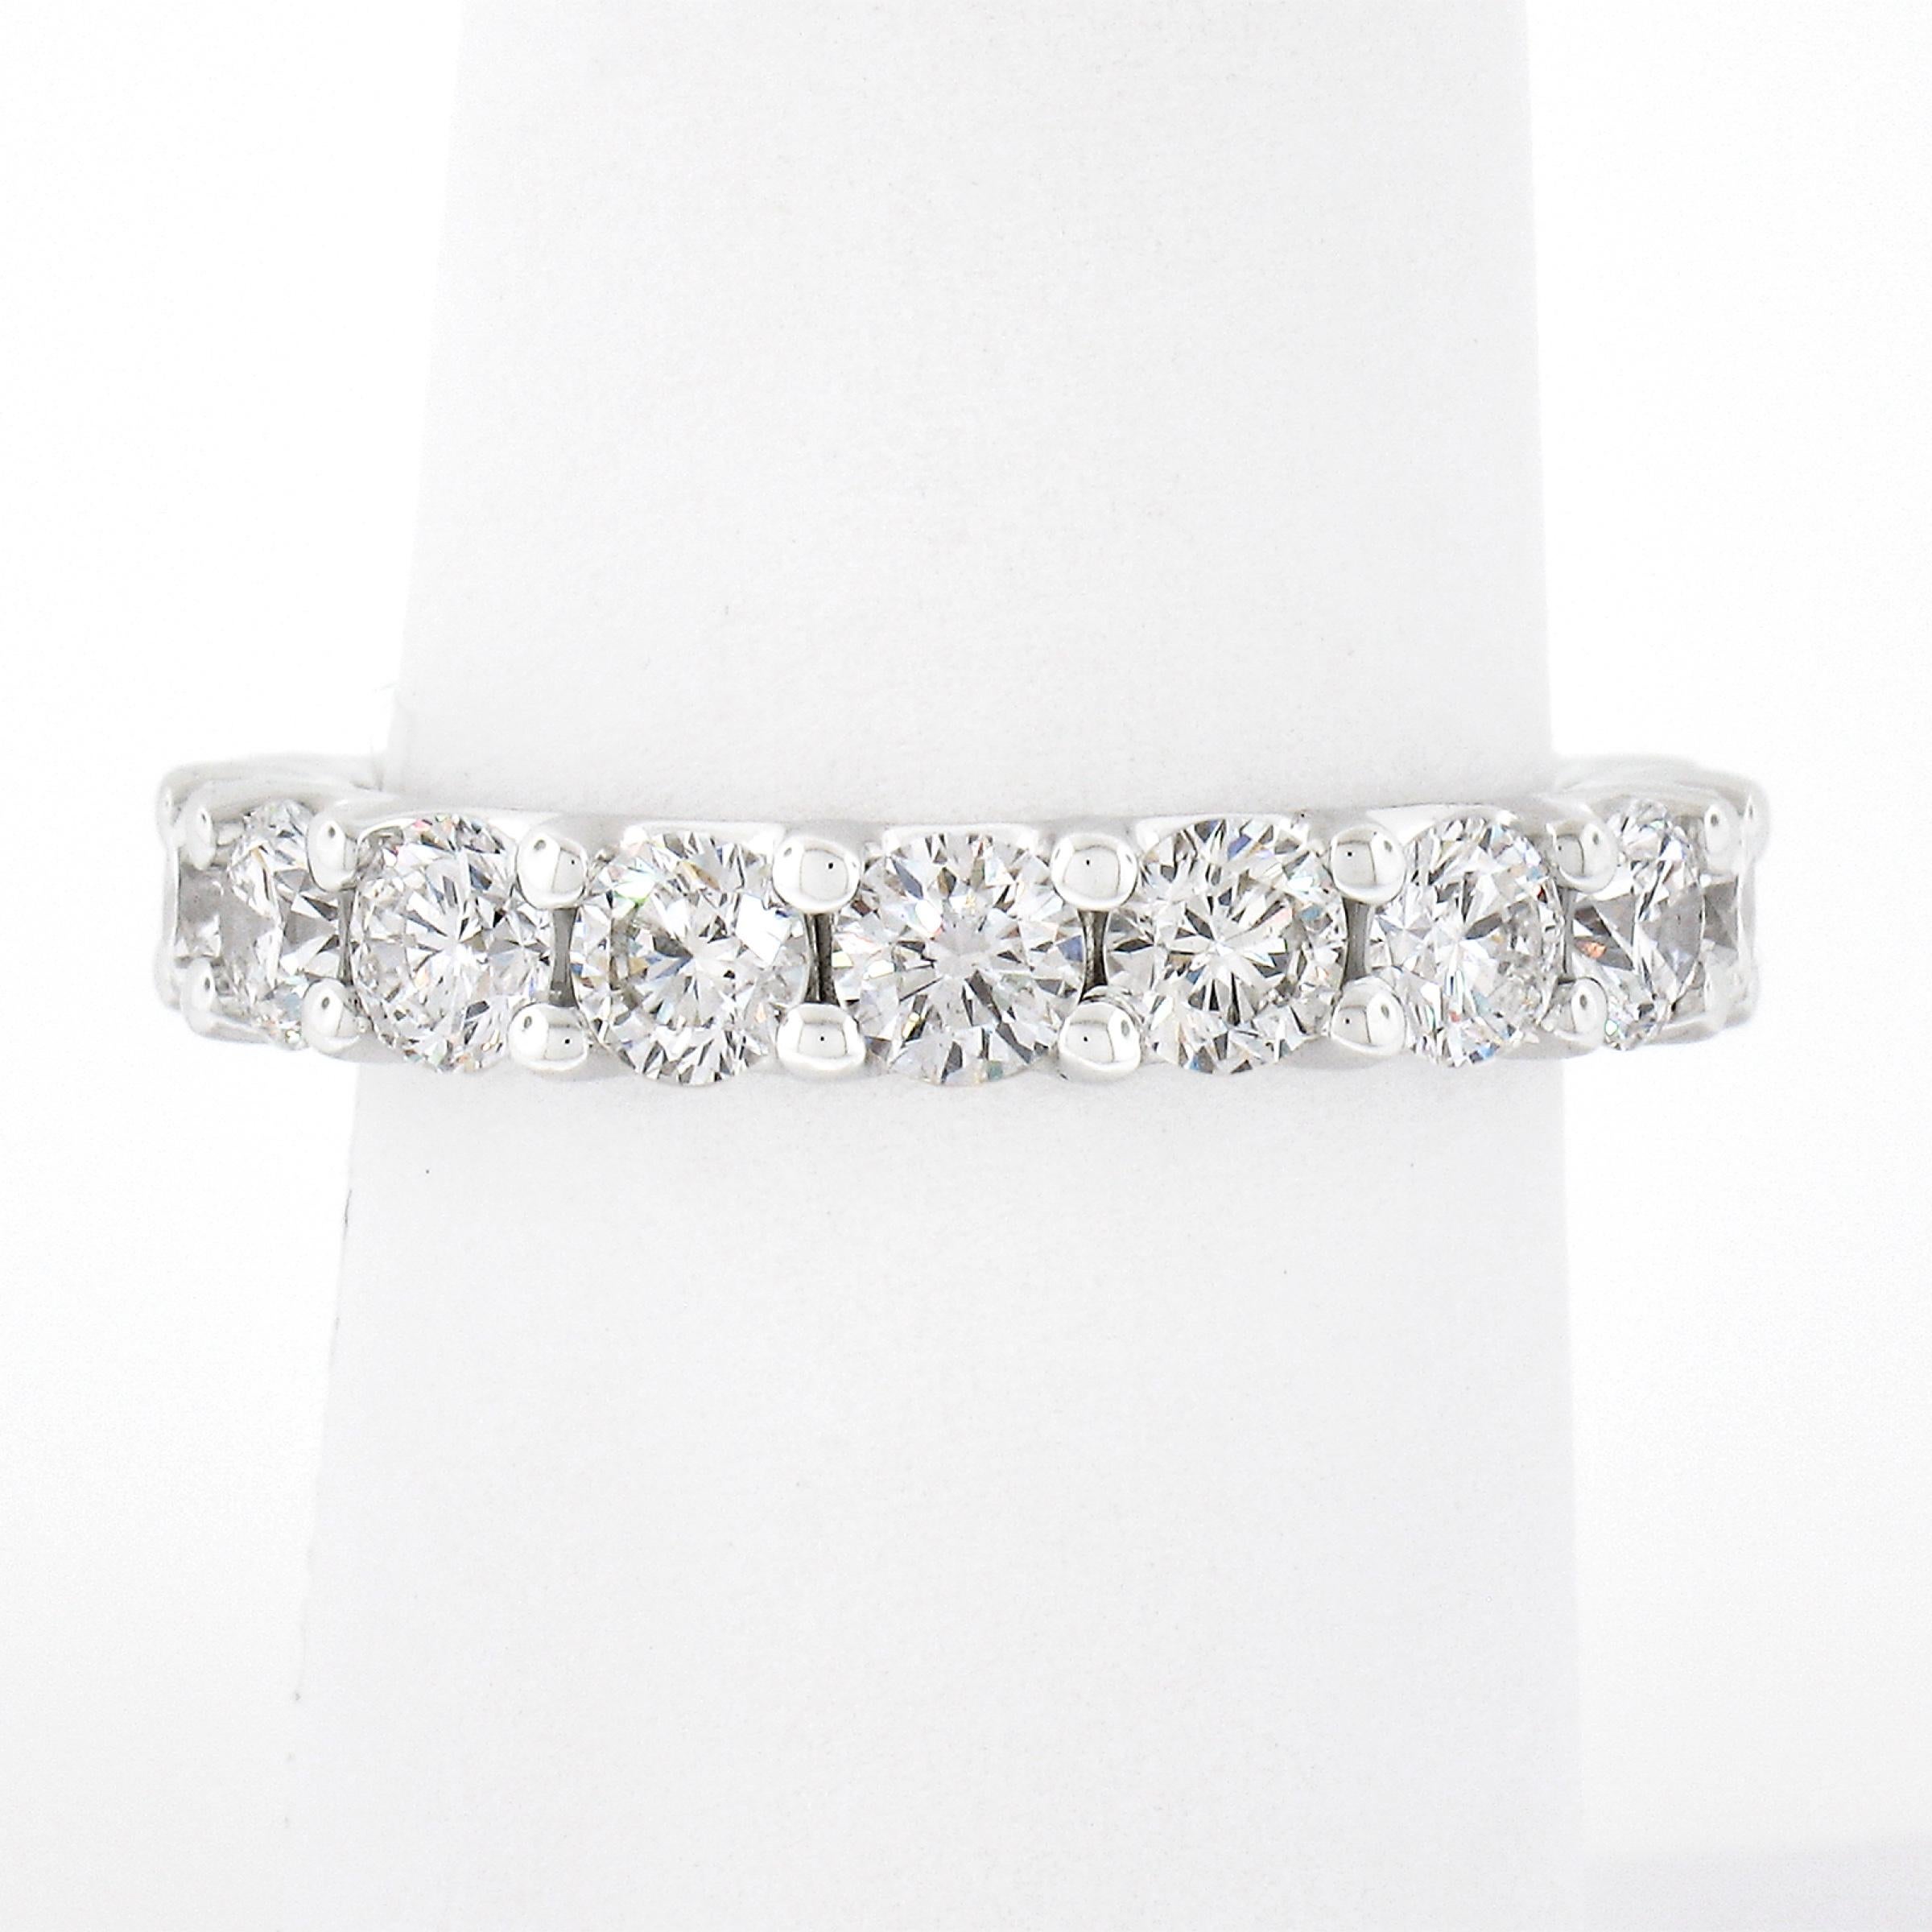 This stunning eternity band ring is crafted in solid 14k white gold and features 18 gorgeous diamond stones which are neatly shared-prong set throughout the entire band. Each of these super fiery round brilliant cut diamonds display a very nice